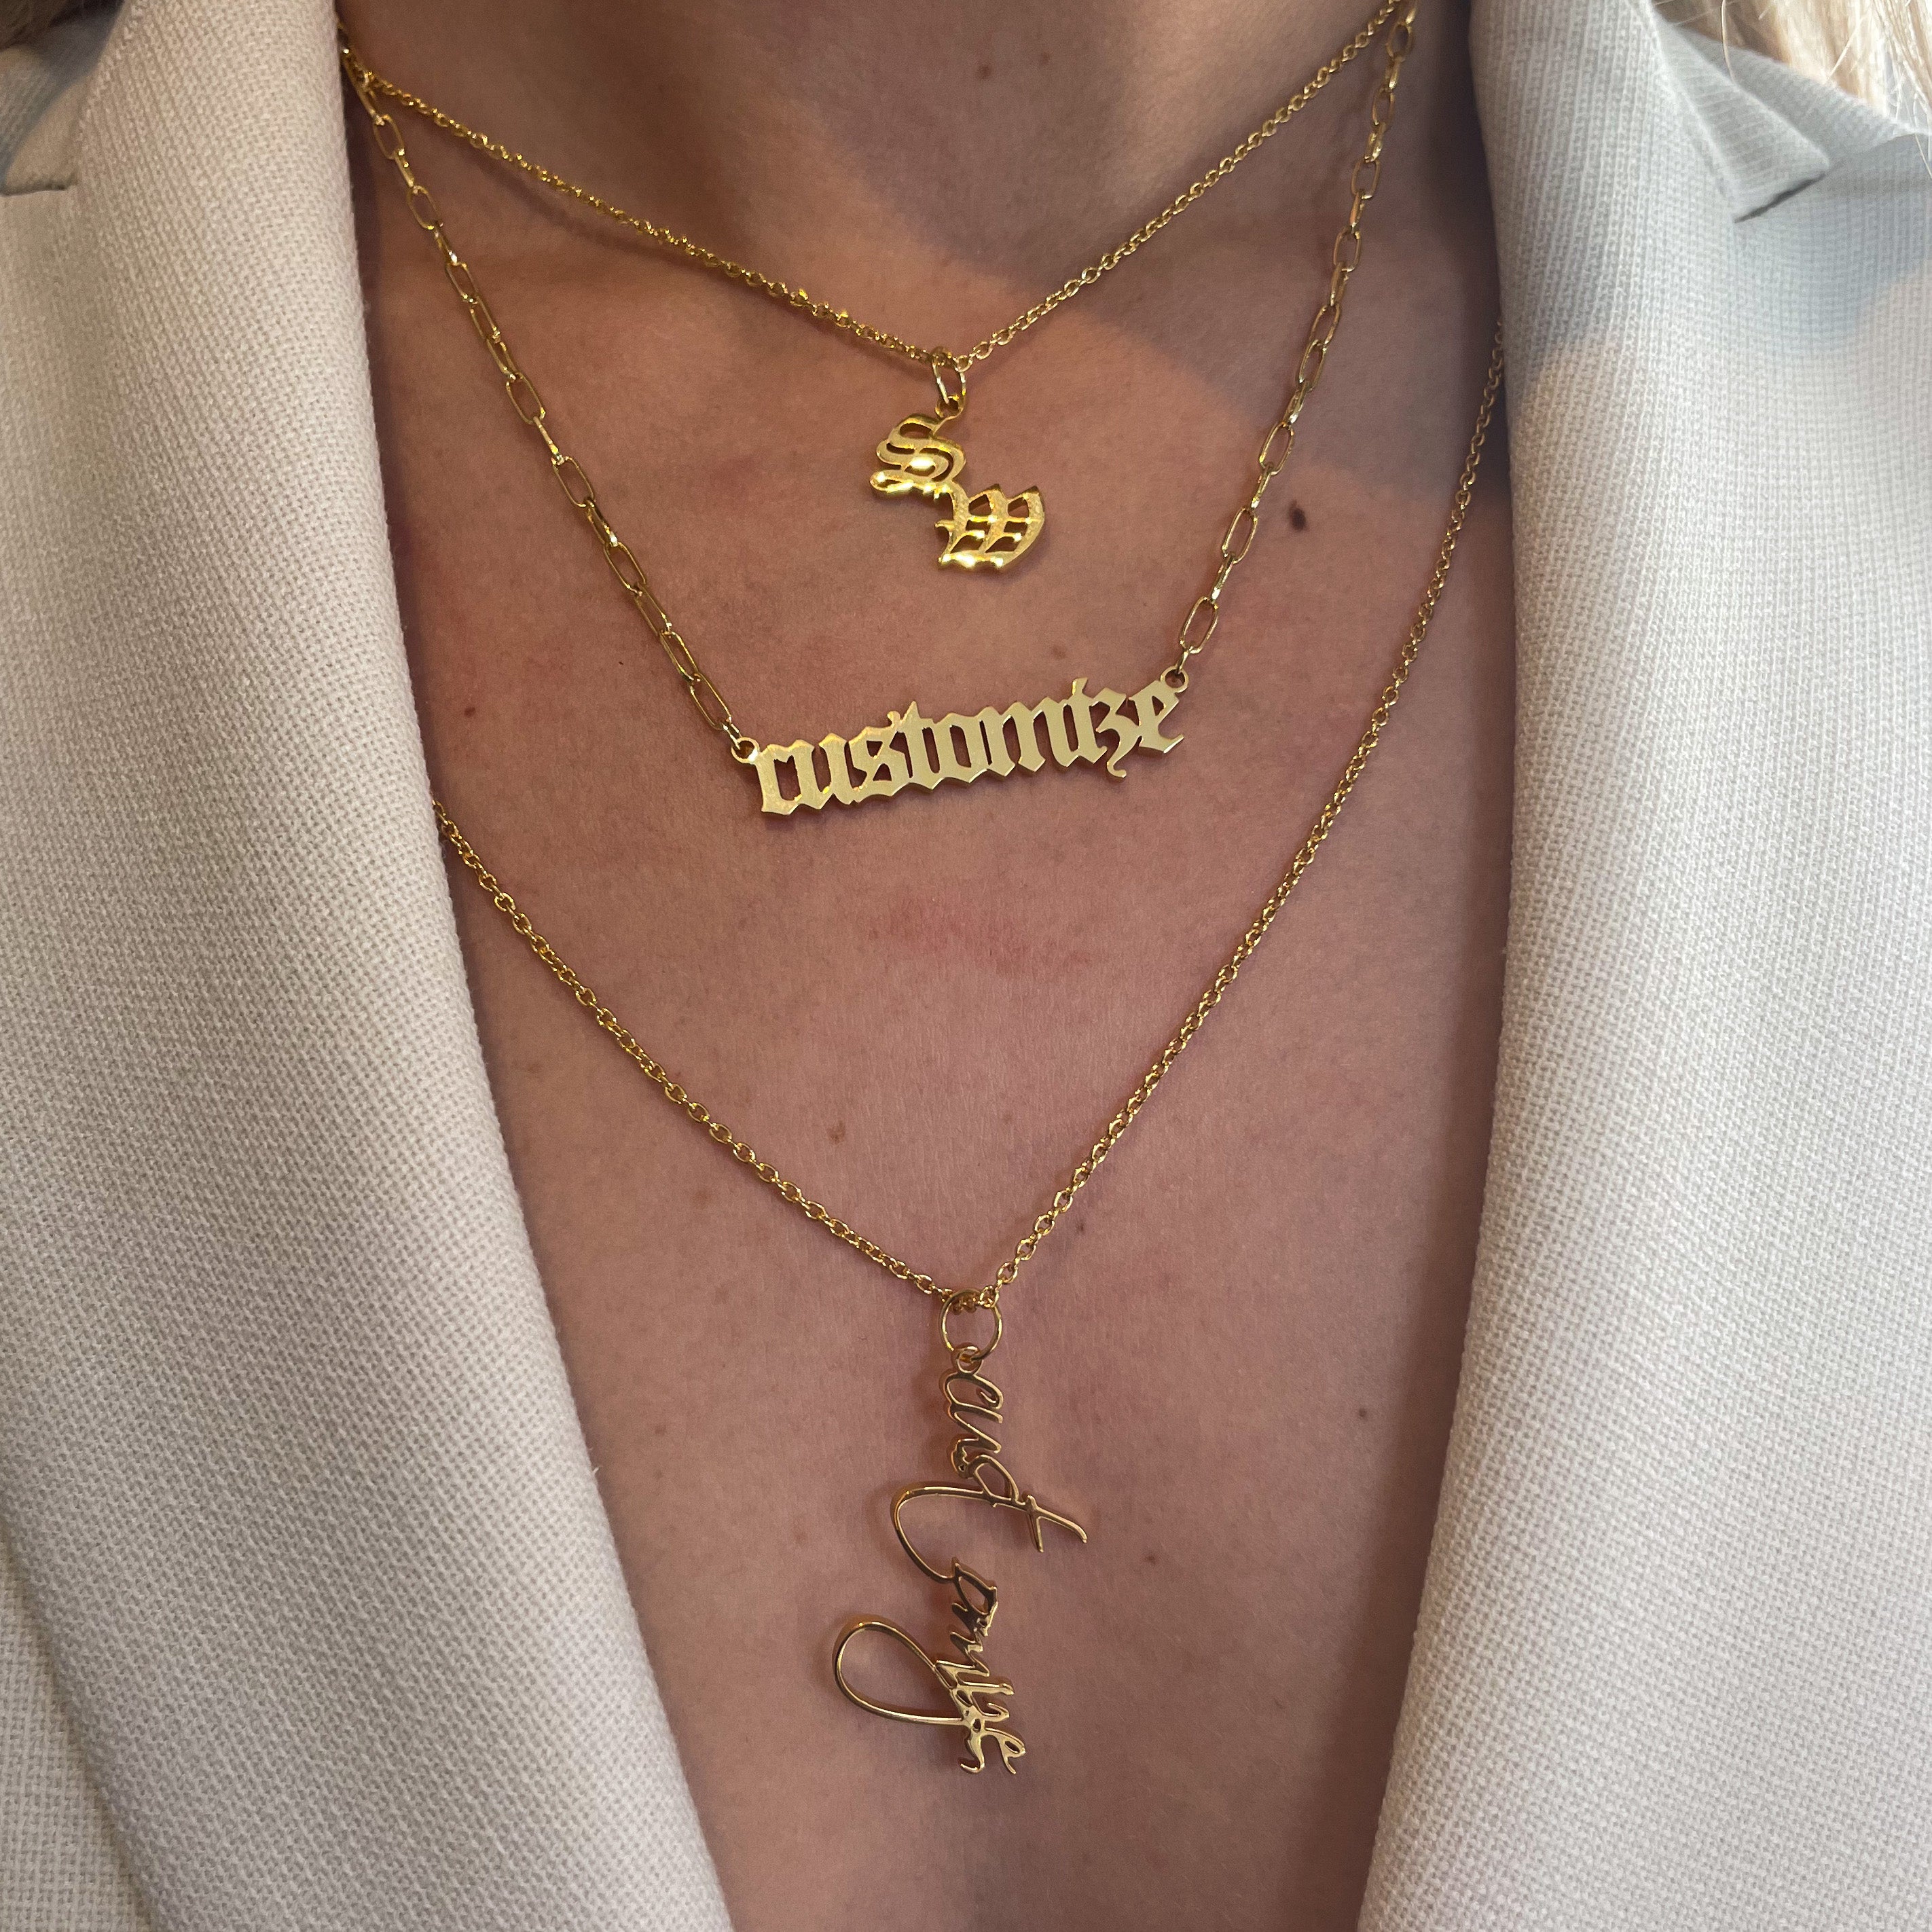 Personalized necklace Gold